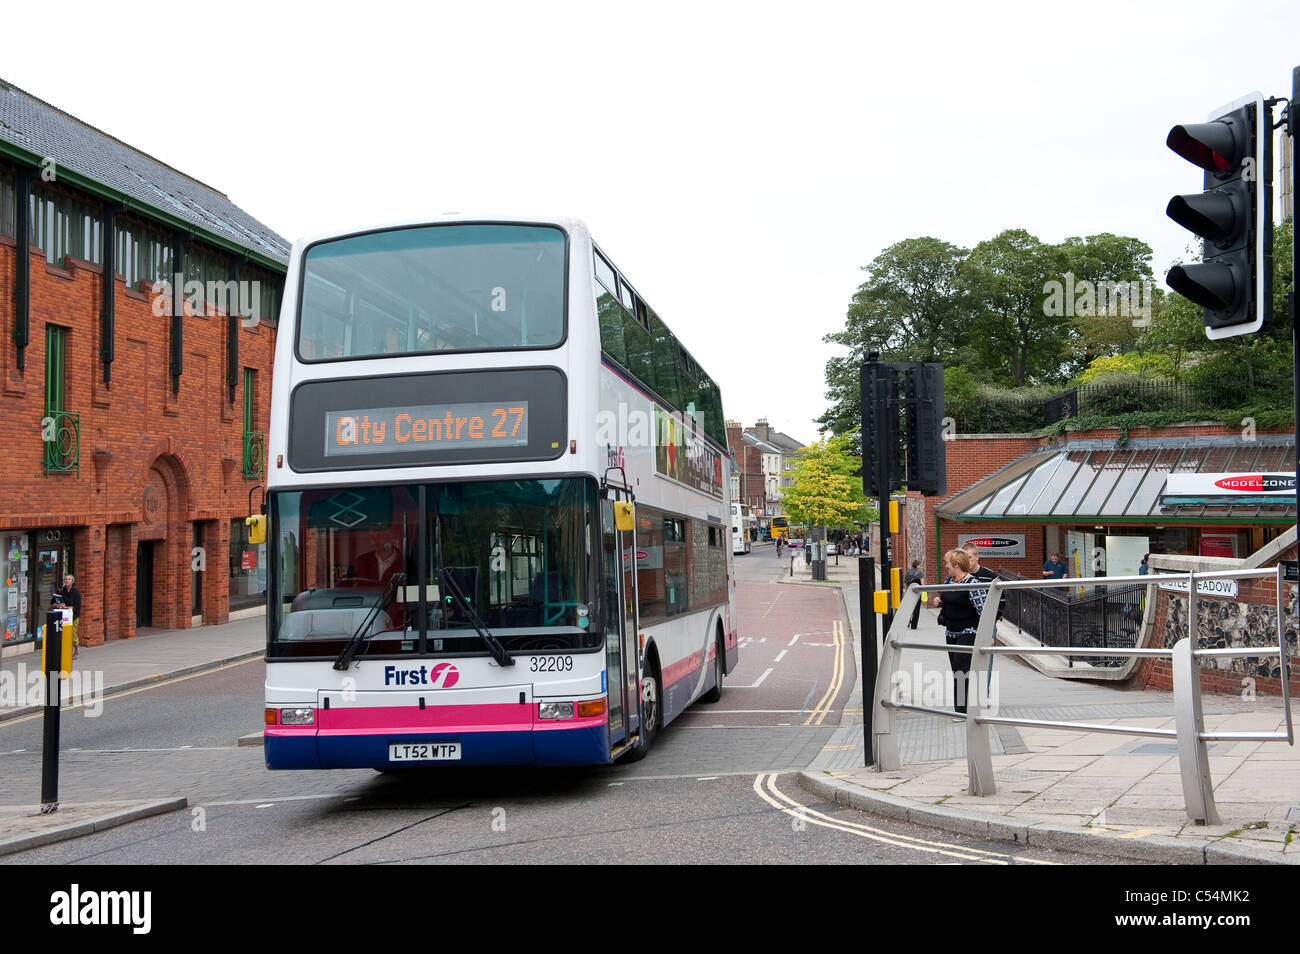 Double decker bus in Firstbus livery driving through Norwich city centre, Norfolk, England. Stock Photo